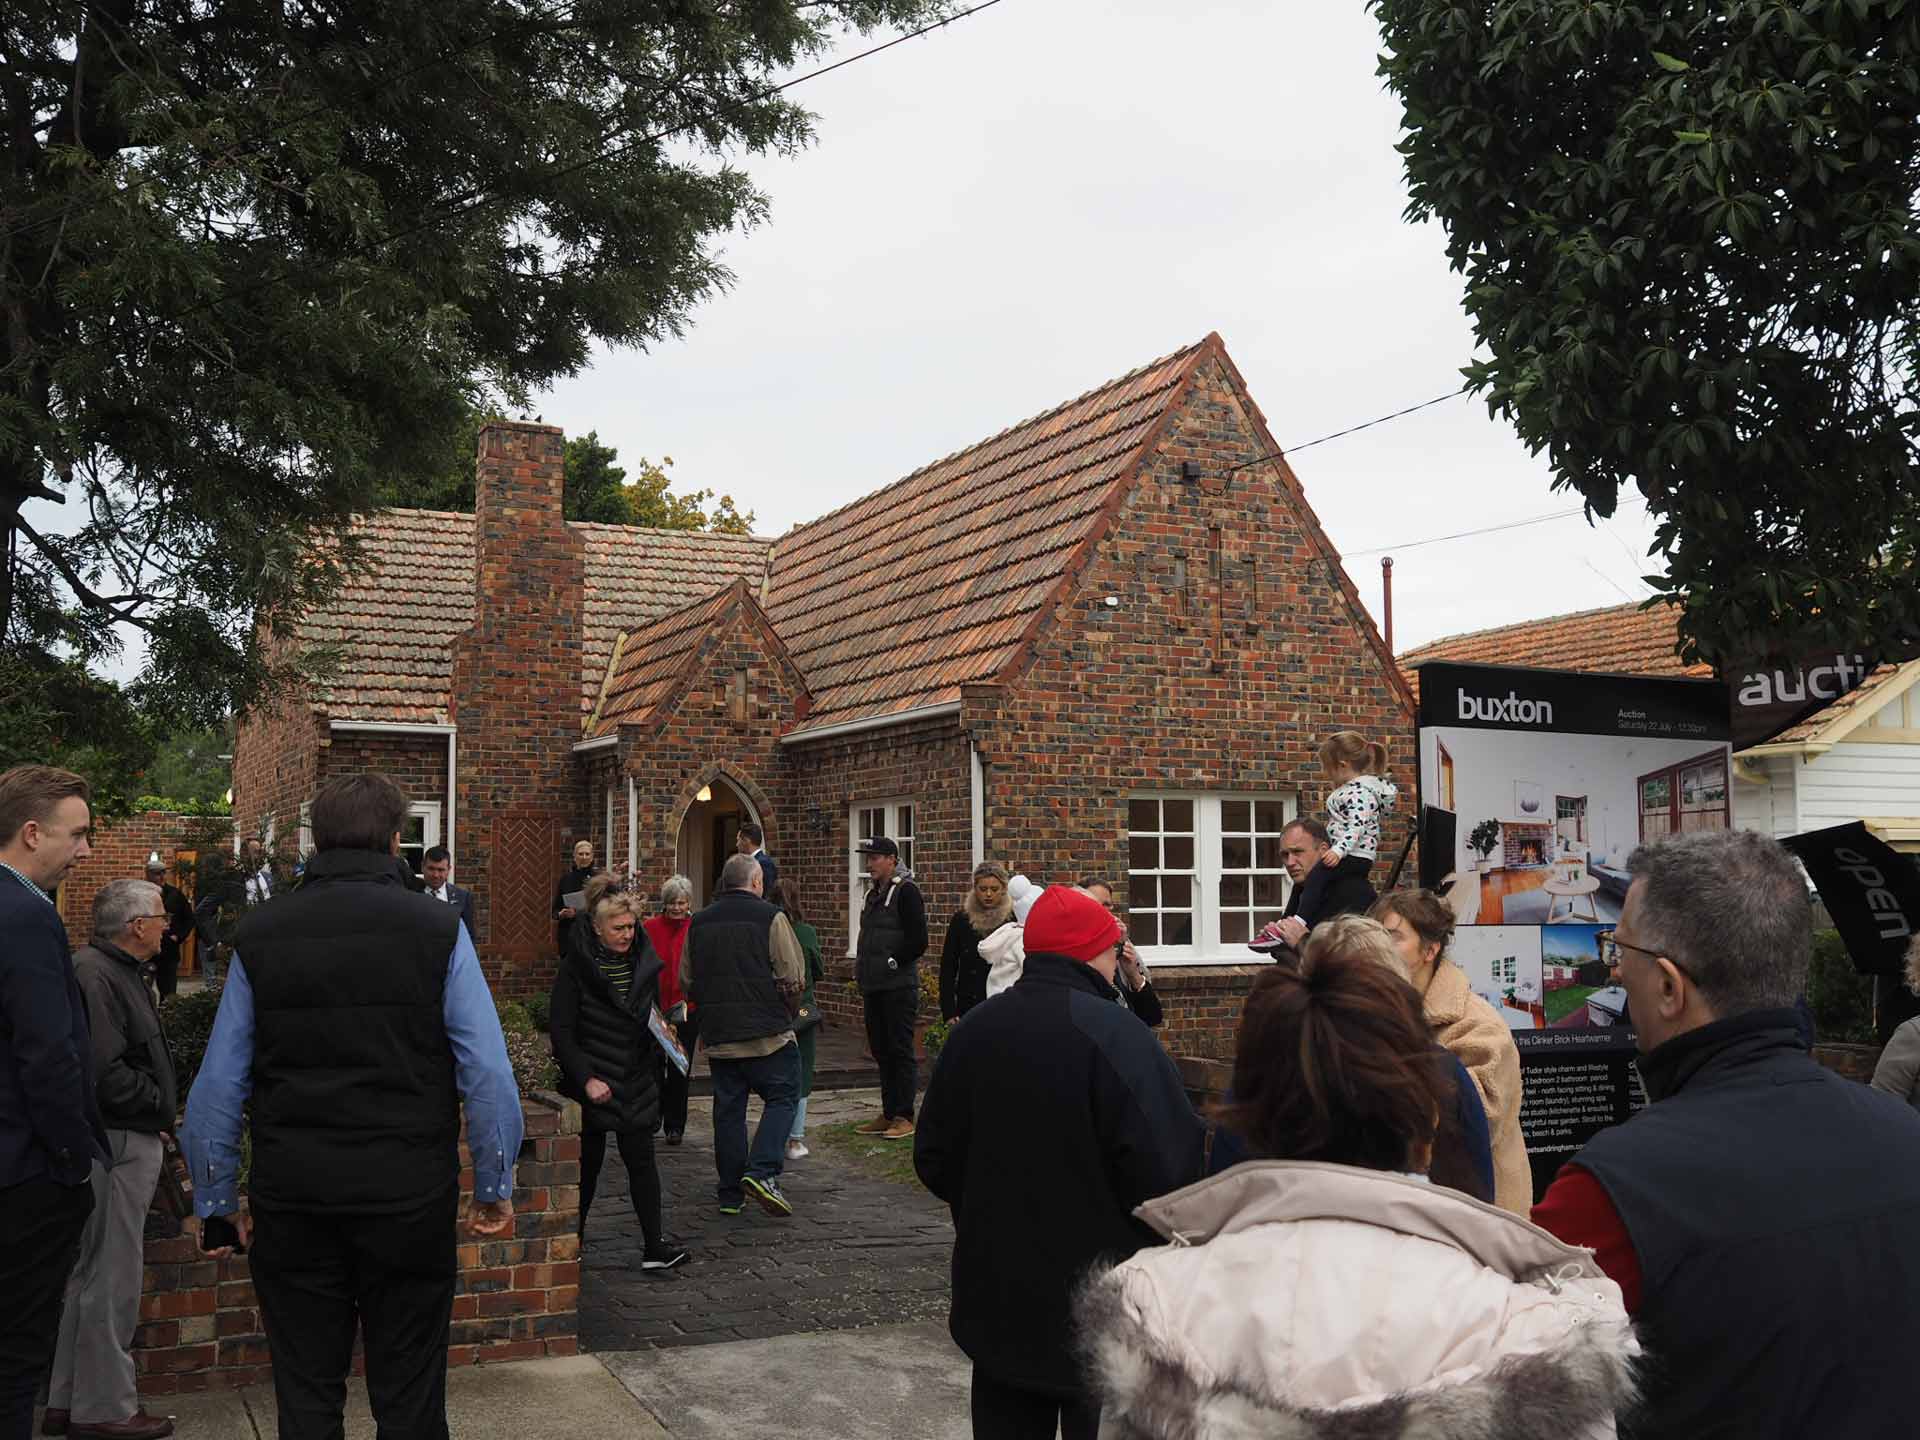 Auction snapshot - Auction in front of brown brick house